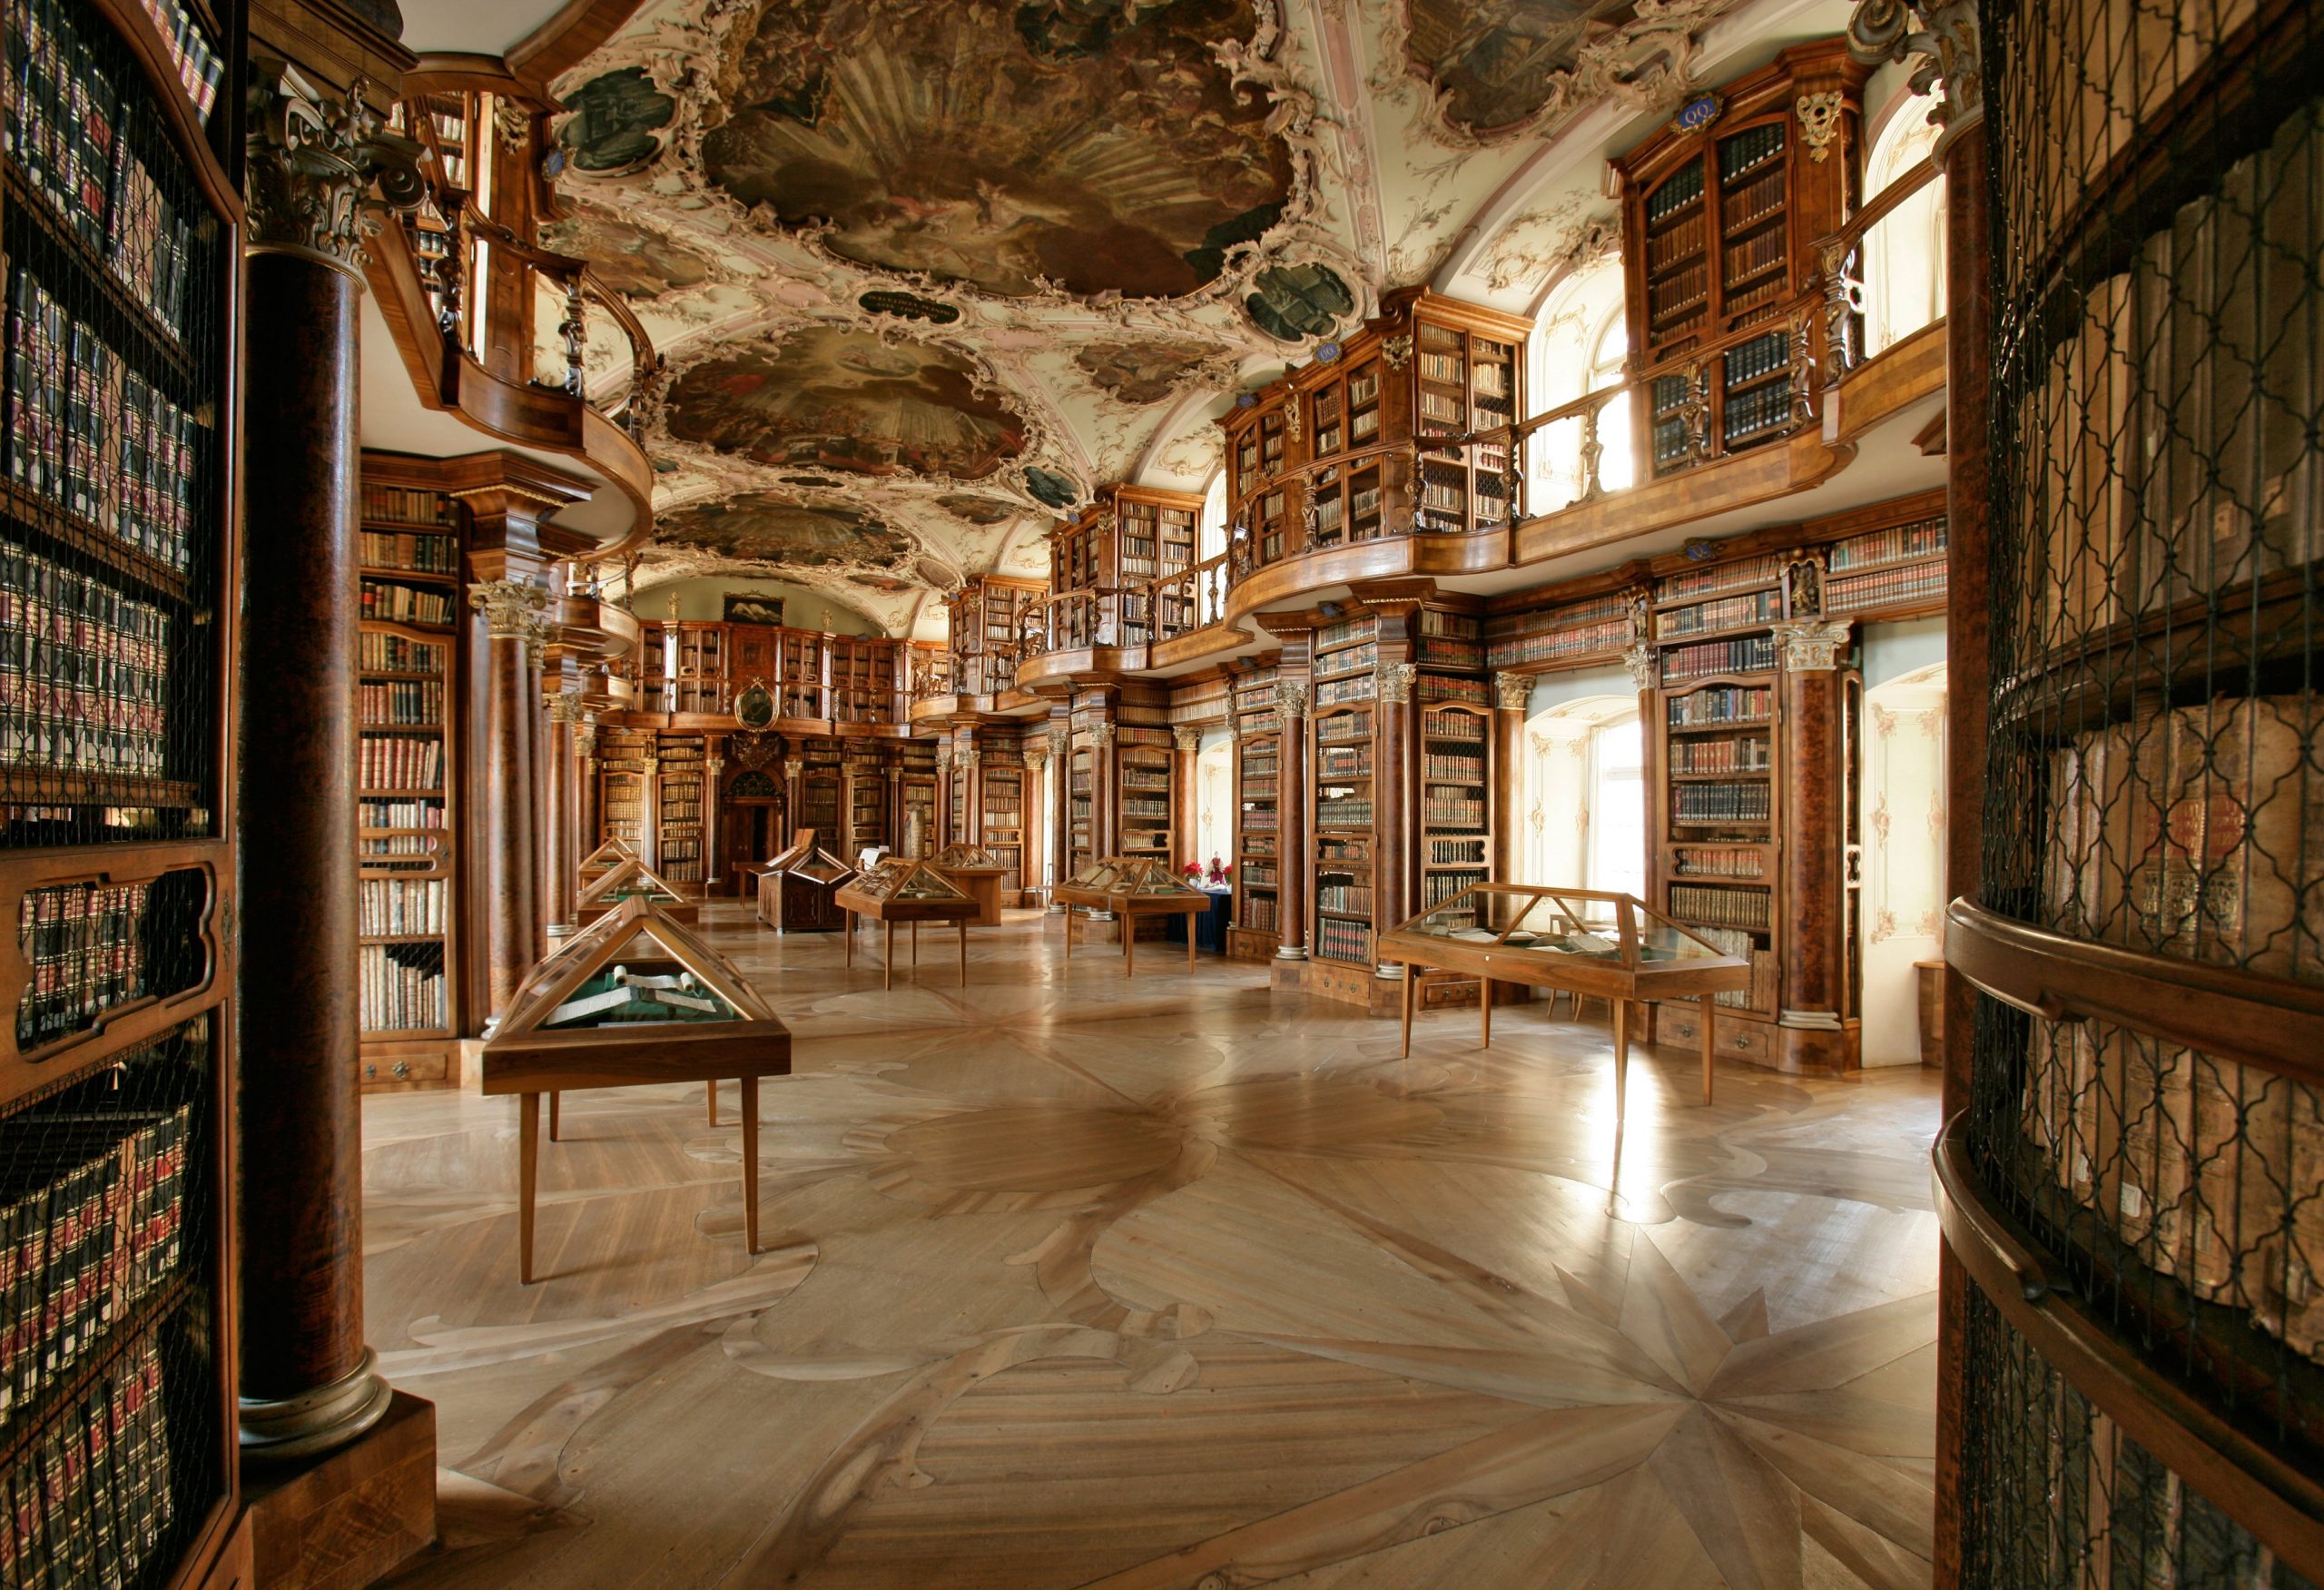 The Abbey Library of St. Gall is located in the Swiss town of St. Gallen Most Beautiful Libraries Around The World